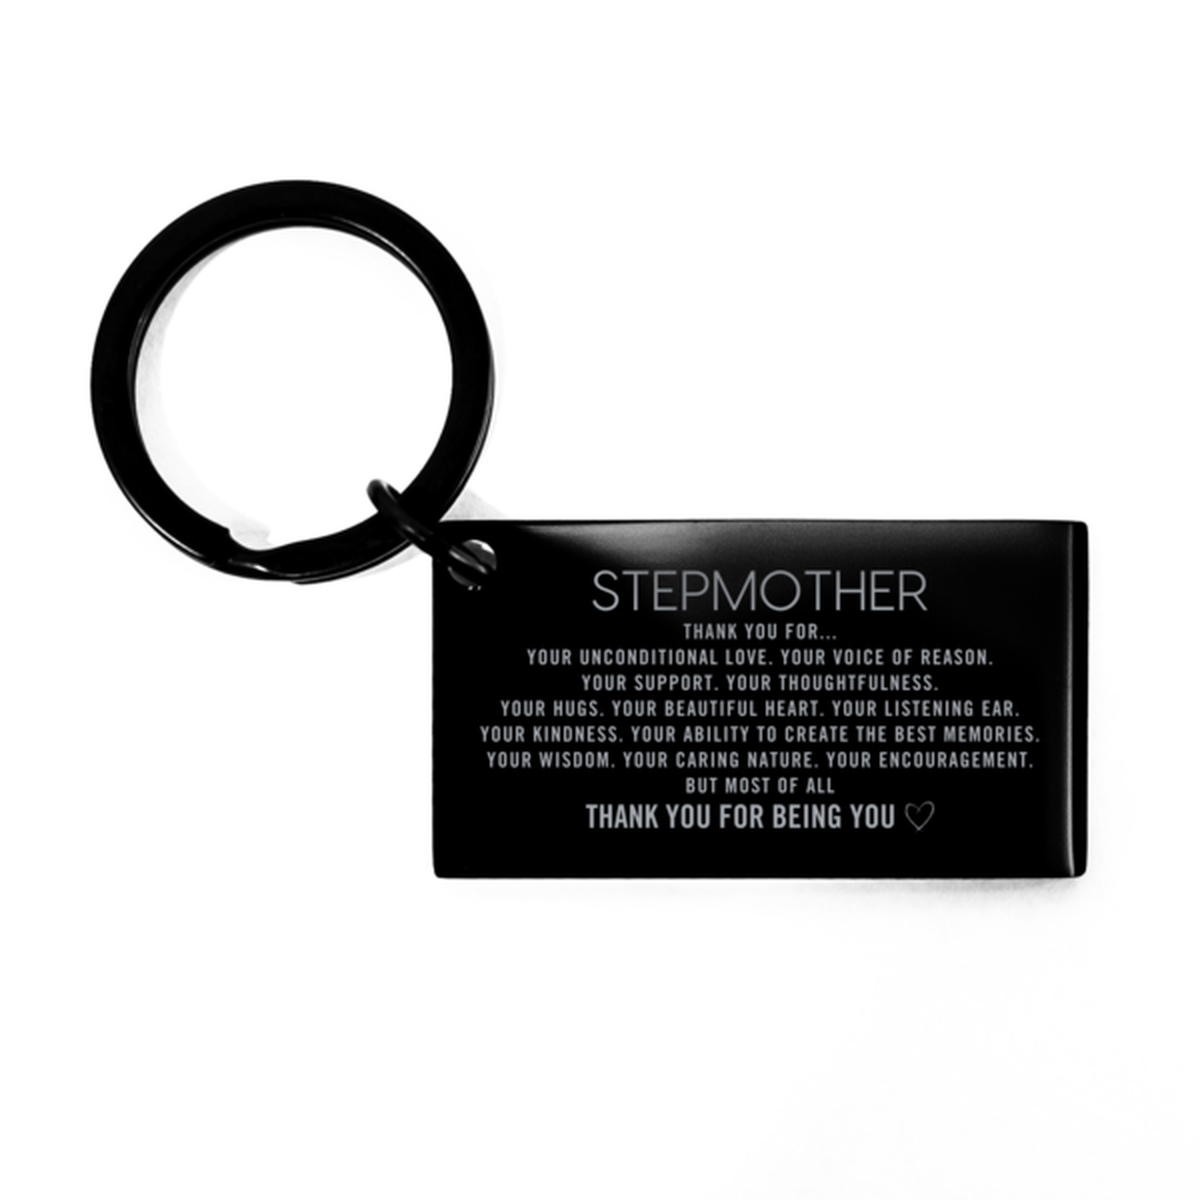 Stepmother Keychain Custom, Engraved Gifts For Stepmother Christmas Graduation Birthday Gifts for Men Women Stepmother Thank you for Your unconditional love